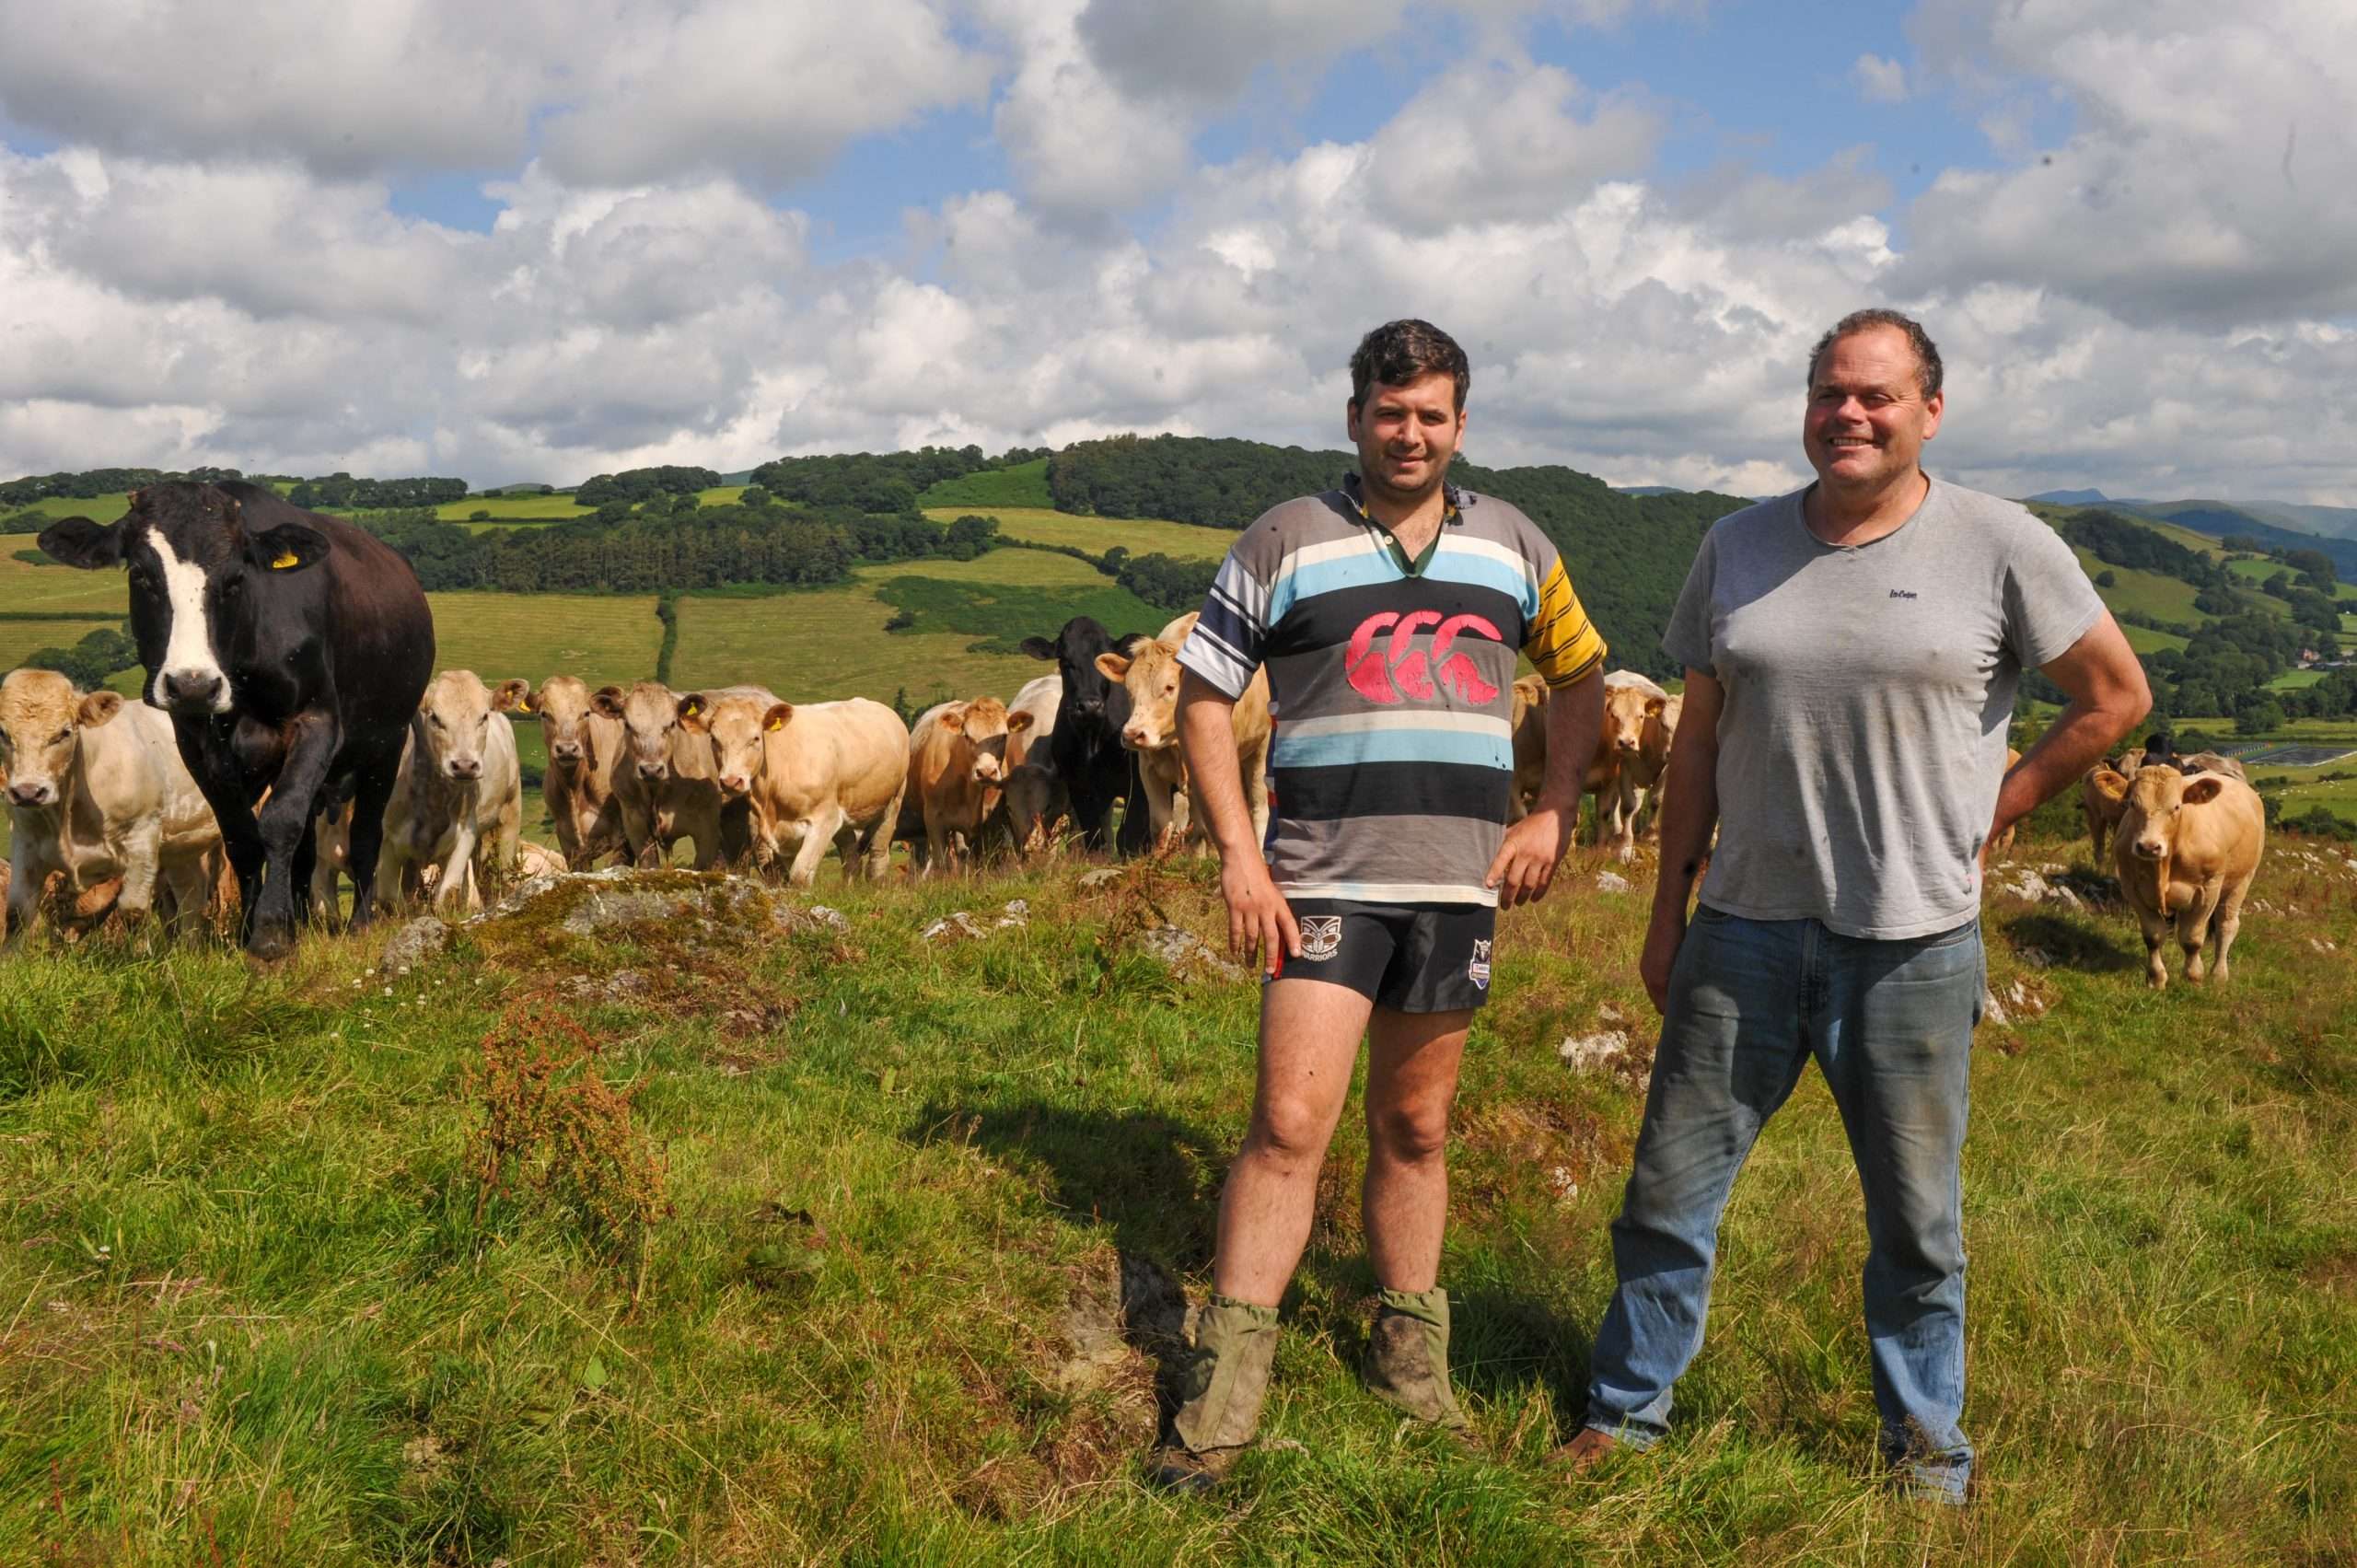 Start to Farm provides young entrant with route to becoming farm business partner